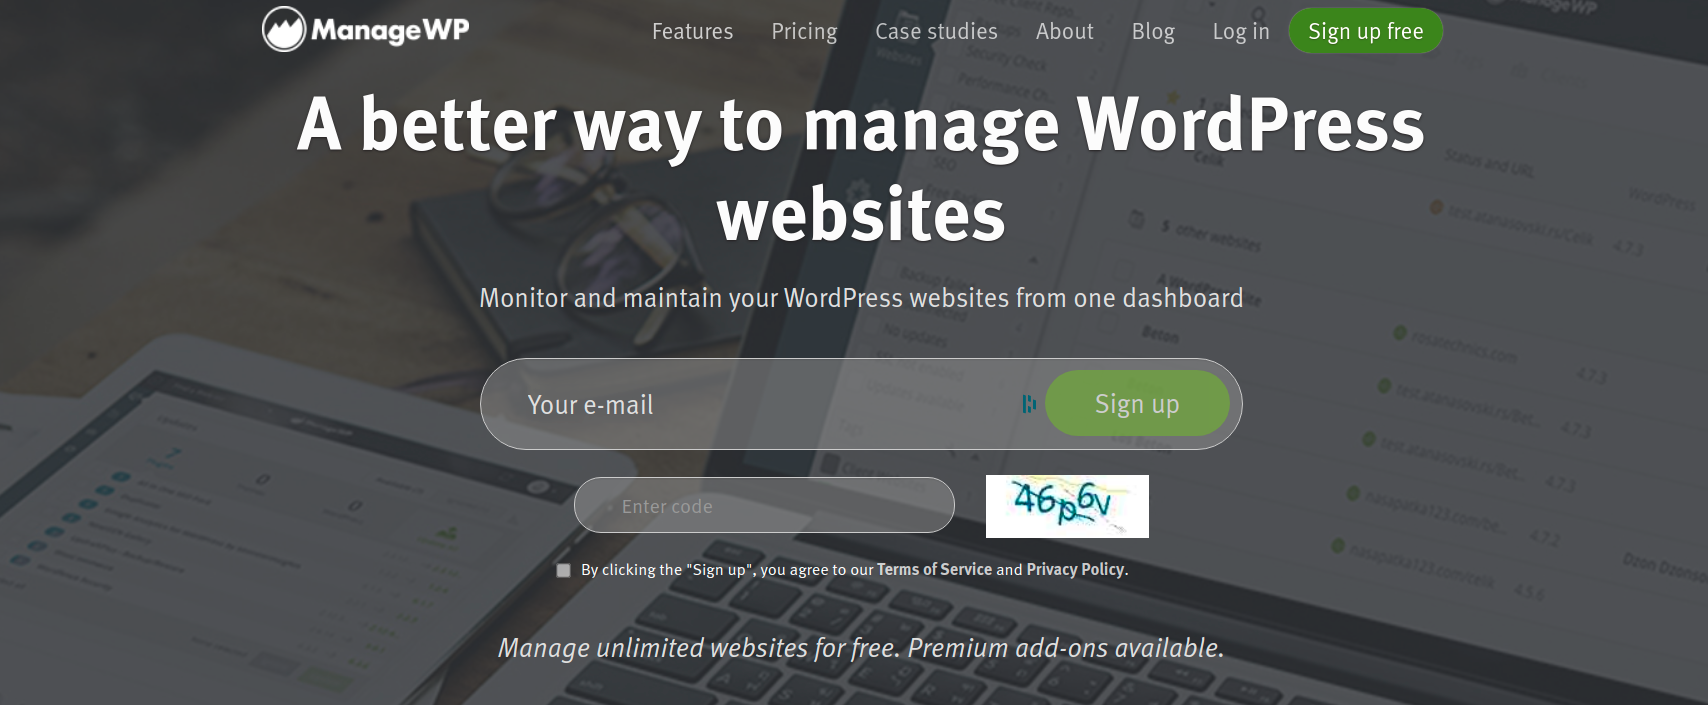 managewp website home page